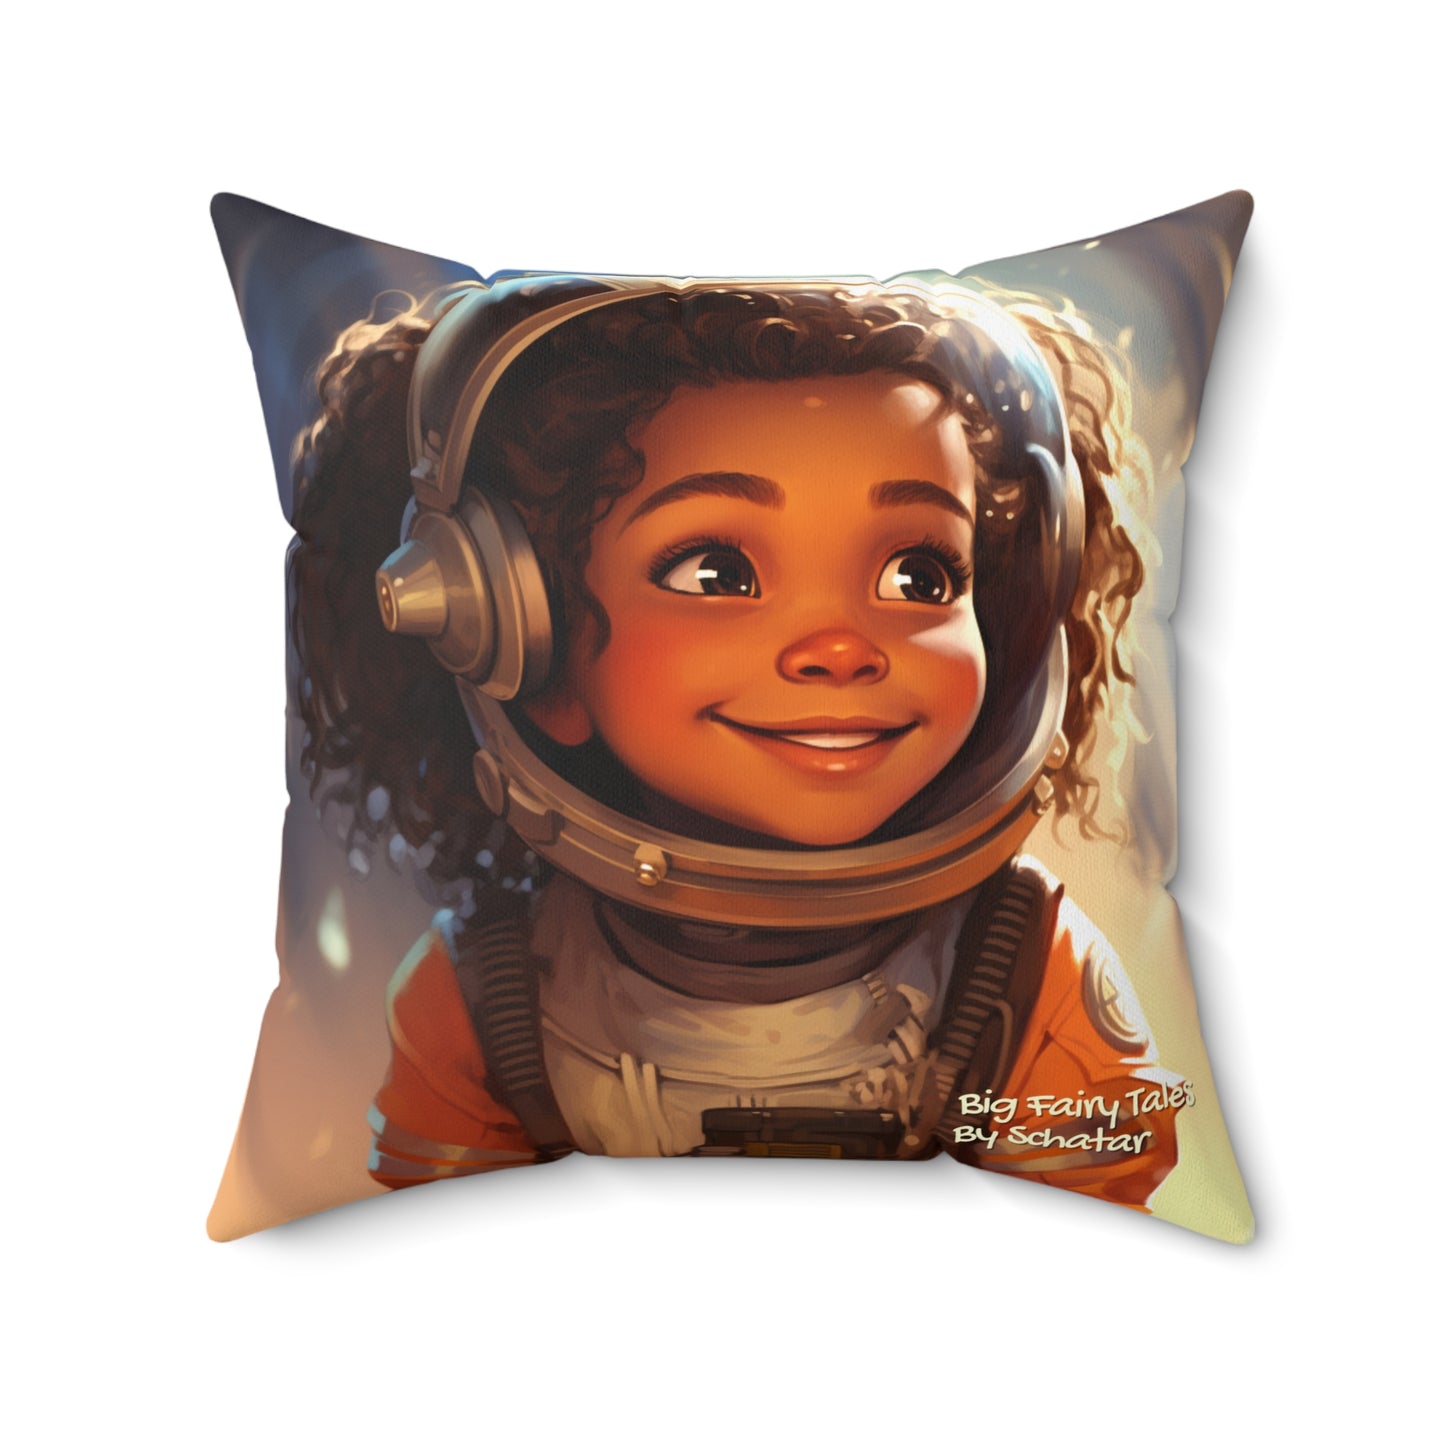 Astronaut - Big Little Professionals Plush Pillow 1 From Big Fairy Tales By Schatar